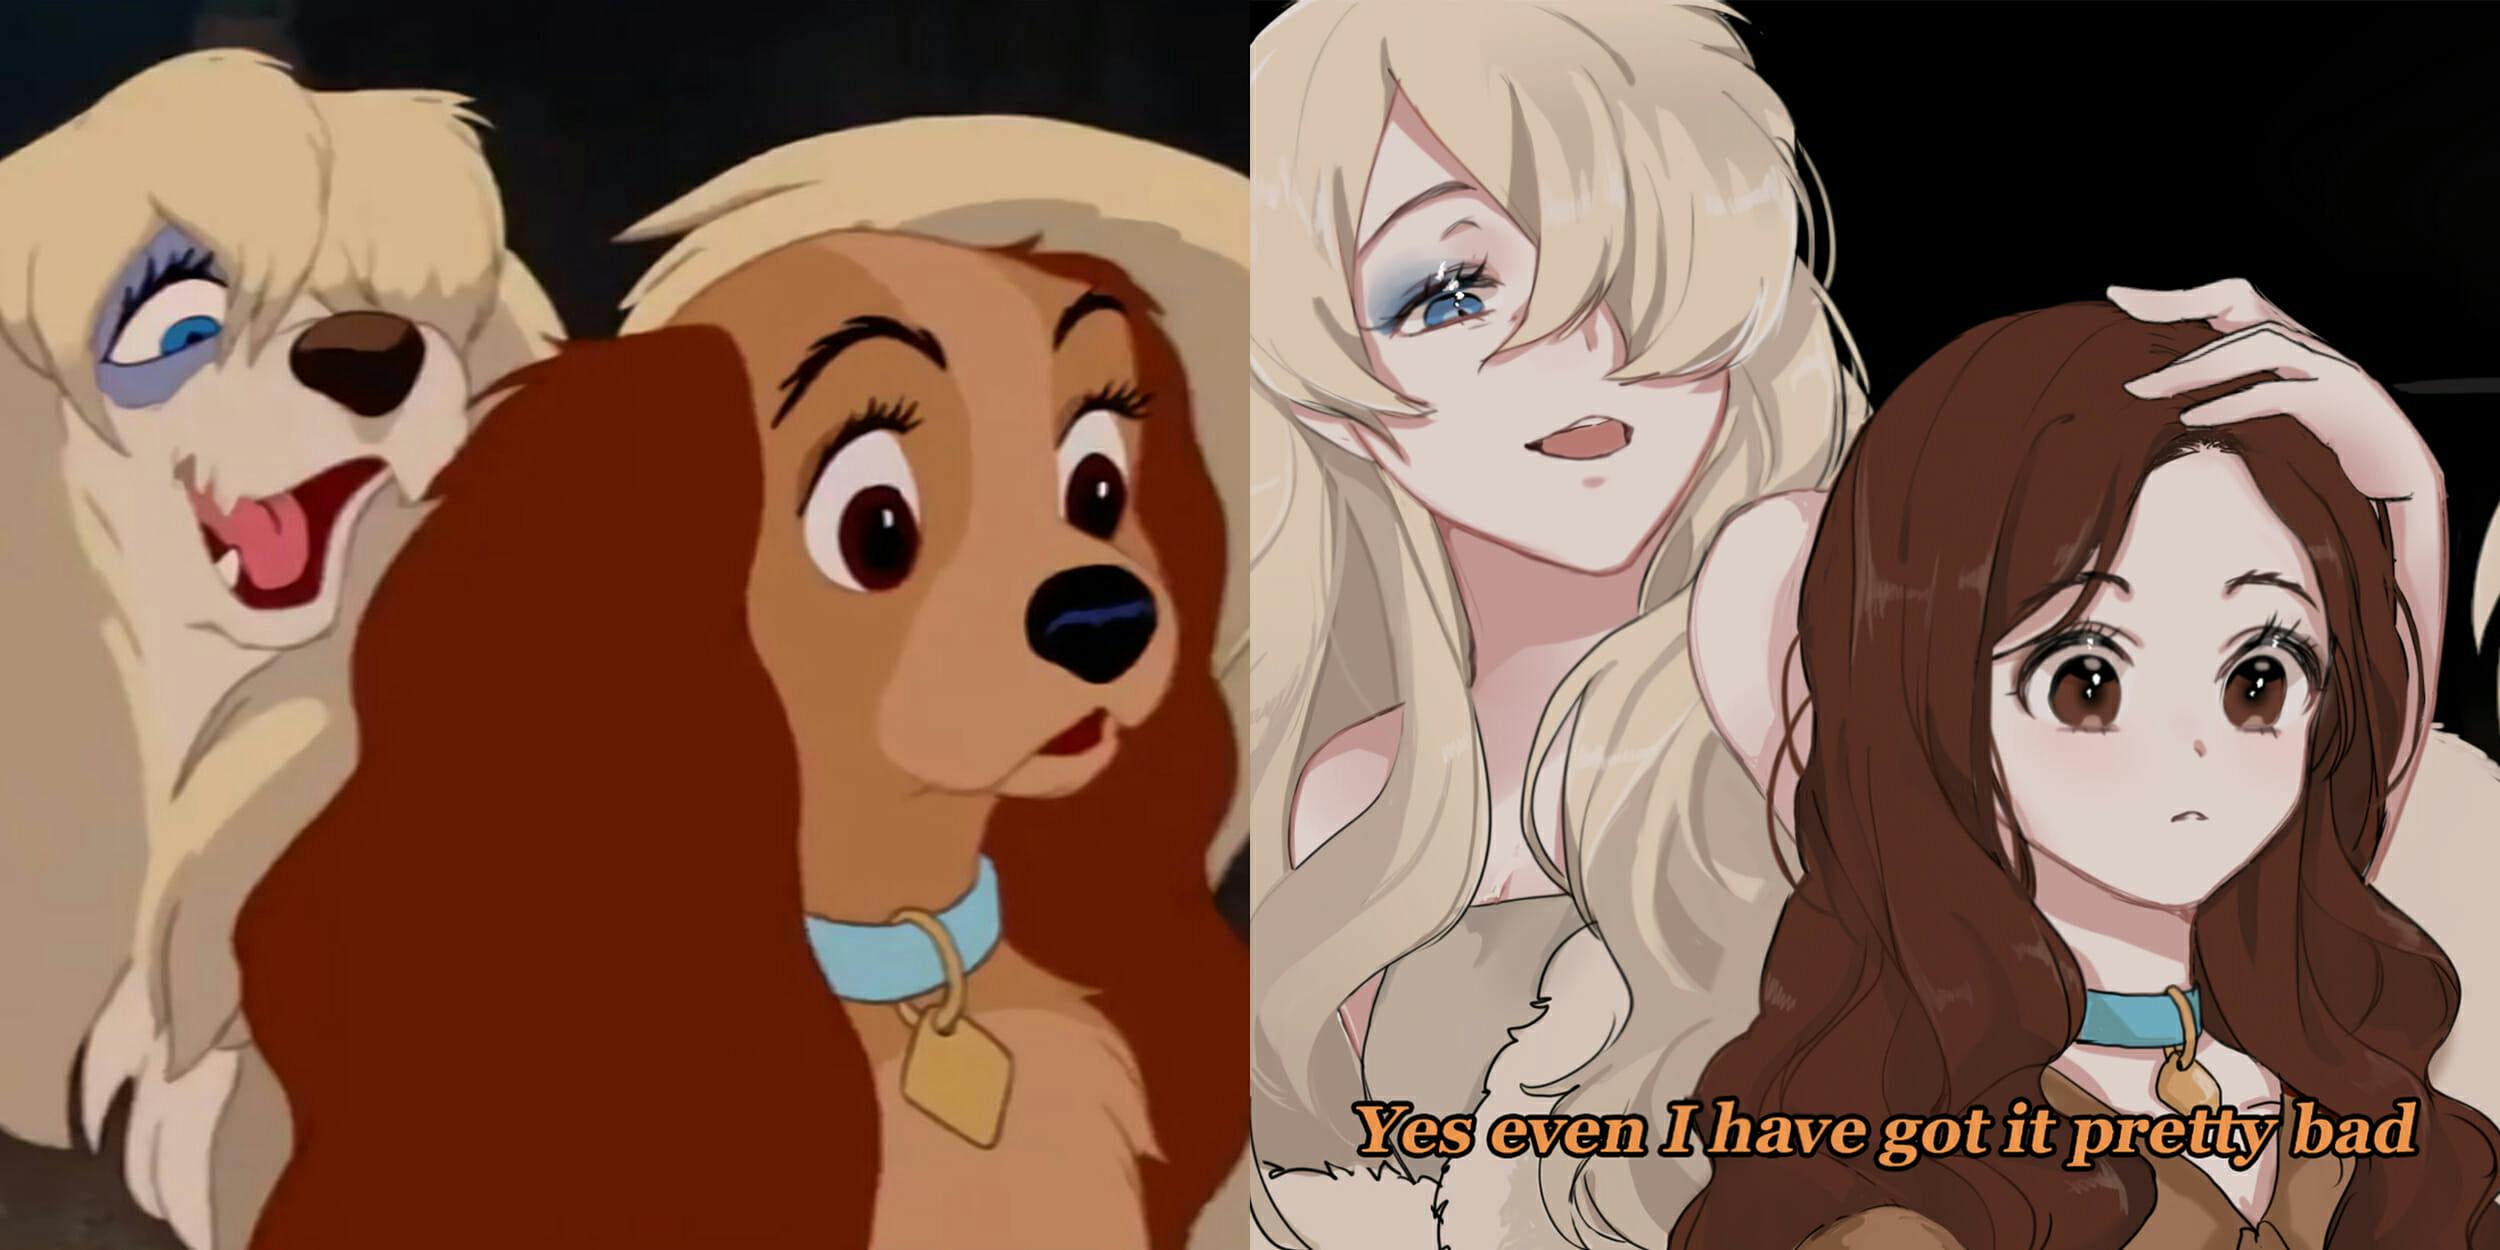 Lady and the Tramp As Anime Characters Becomes a Twitter Meme